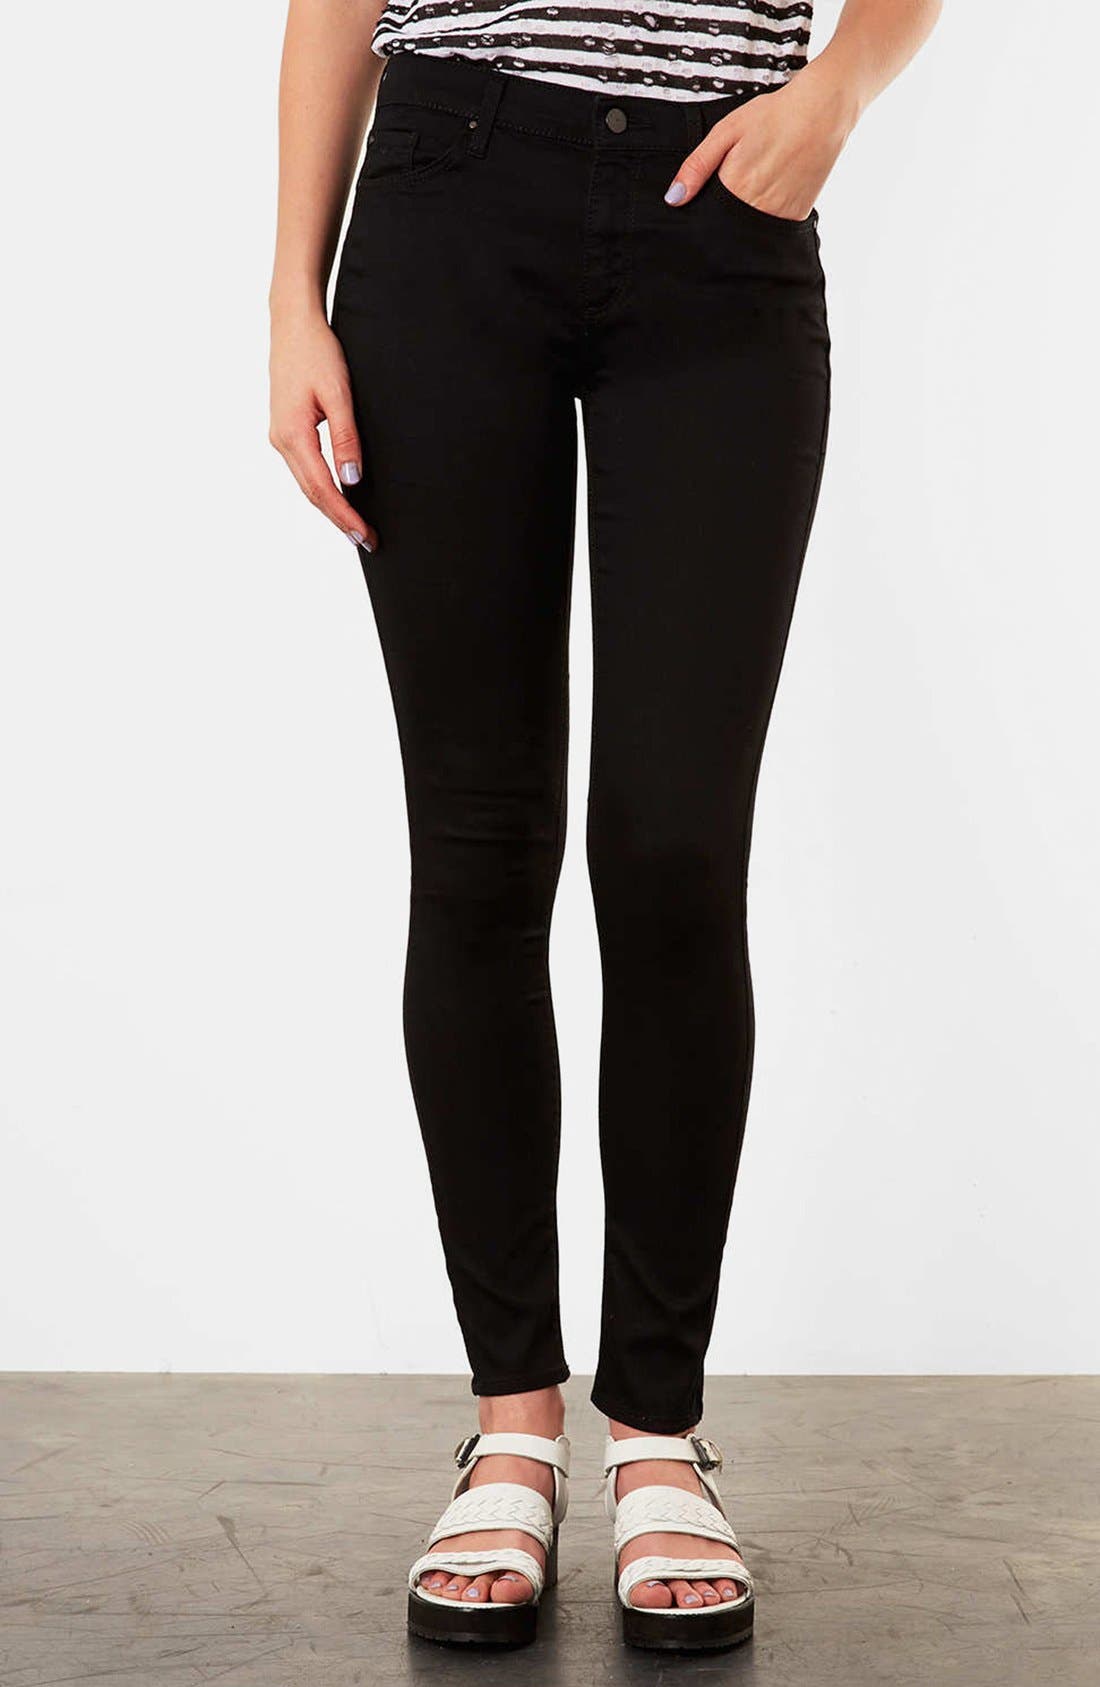 topshop leigh jeans sale